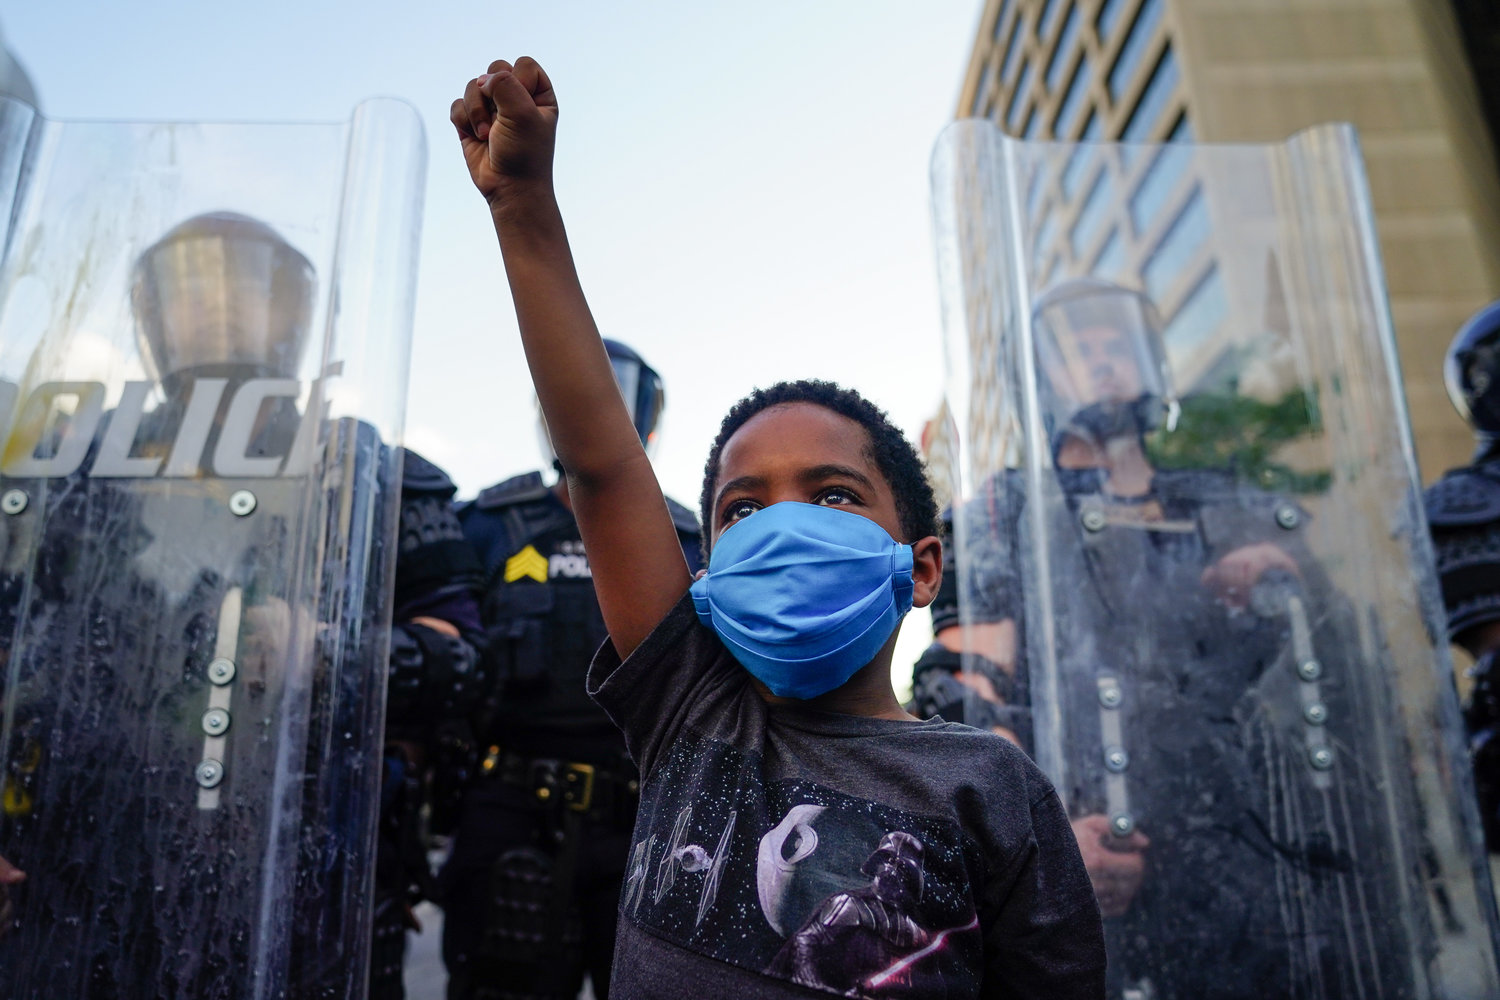 Q&A: Talking To Kids About Black Lives And Police Violence